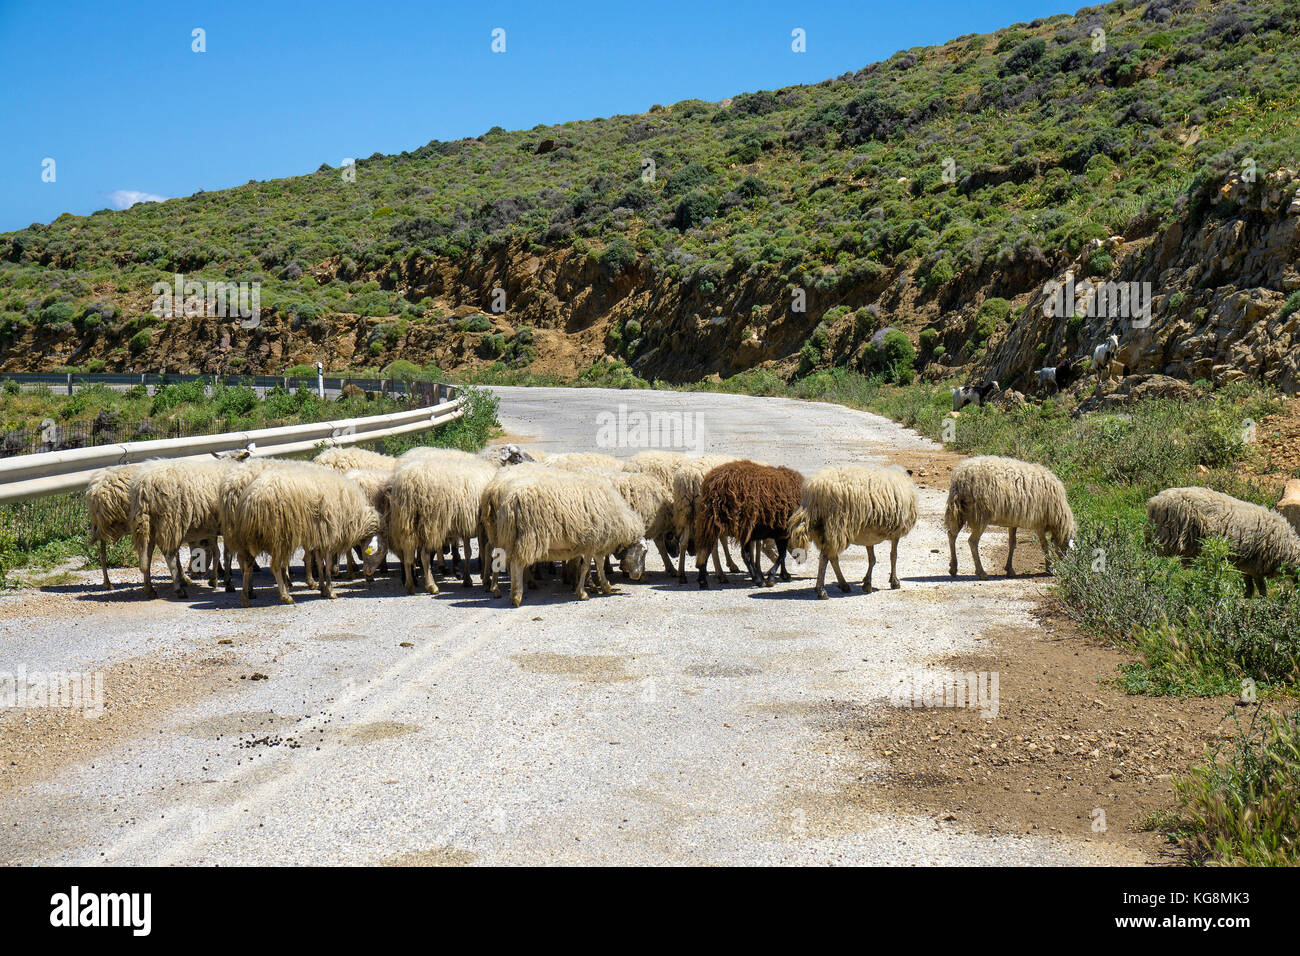 A sheep herd block the road to Apollonas, north side of Naxos island, Cyclades, Aegean, Greece Stock Photo